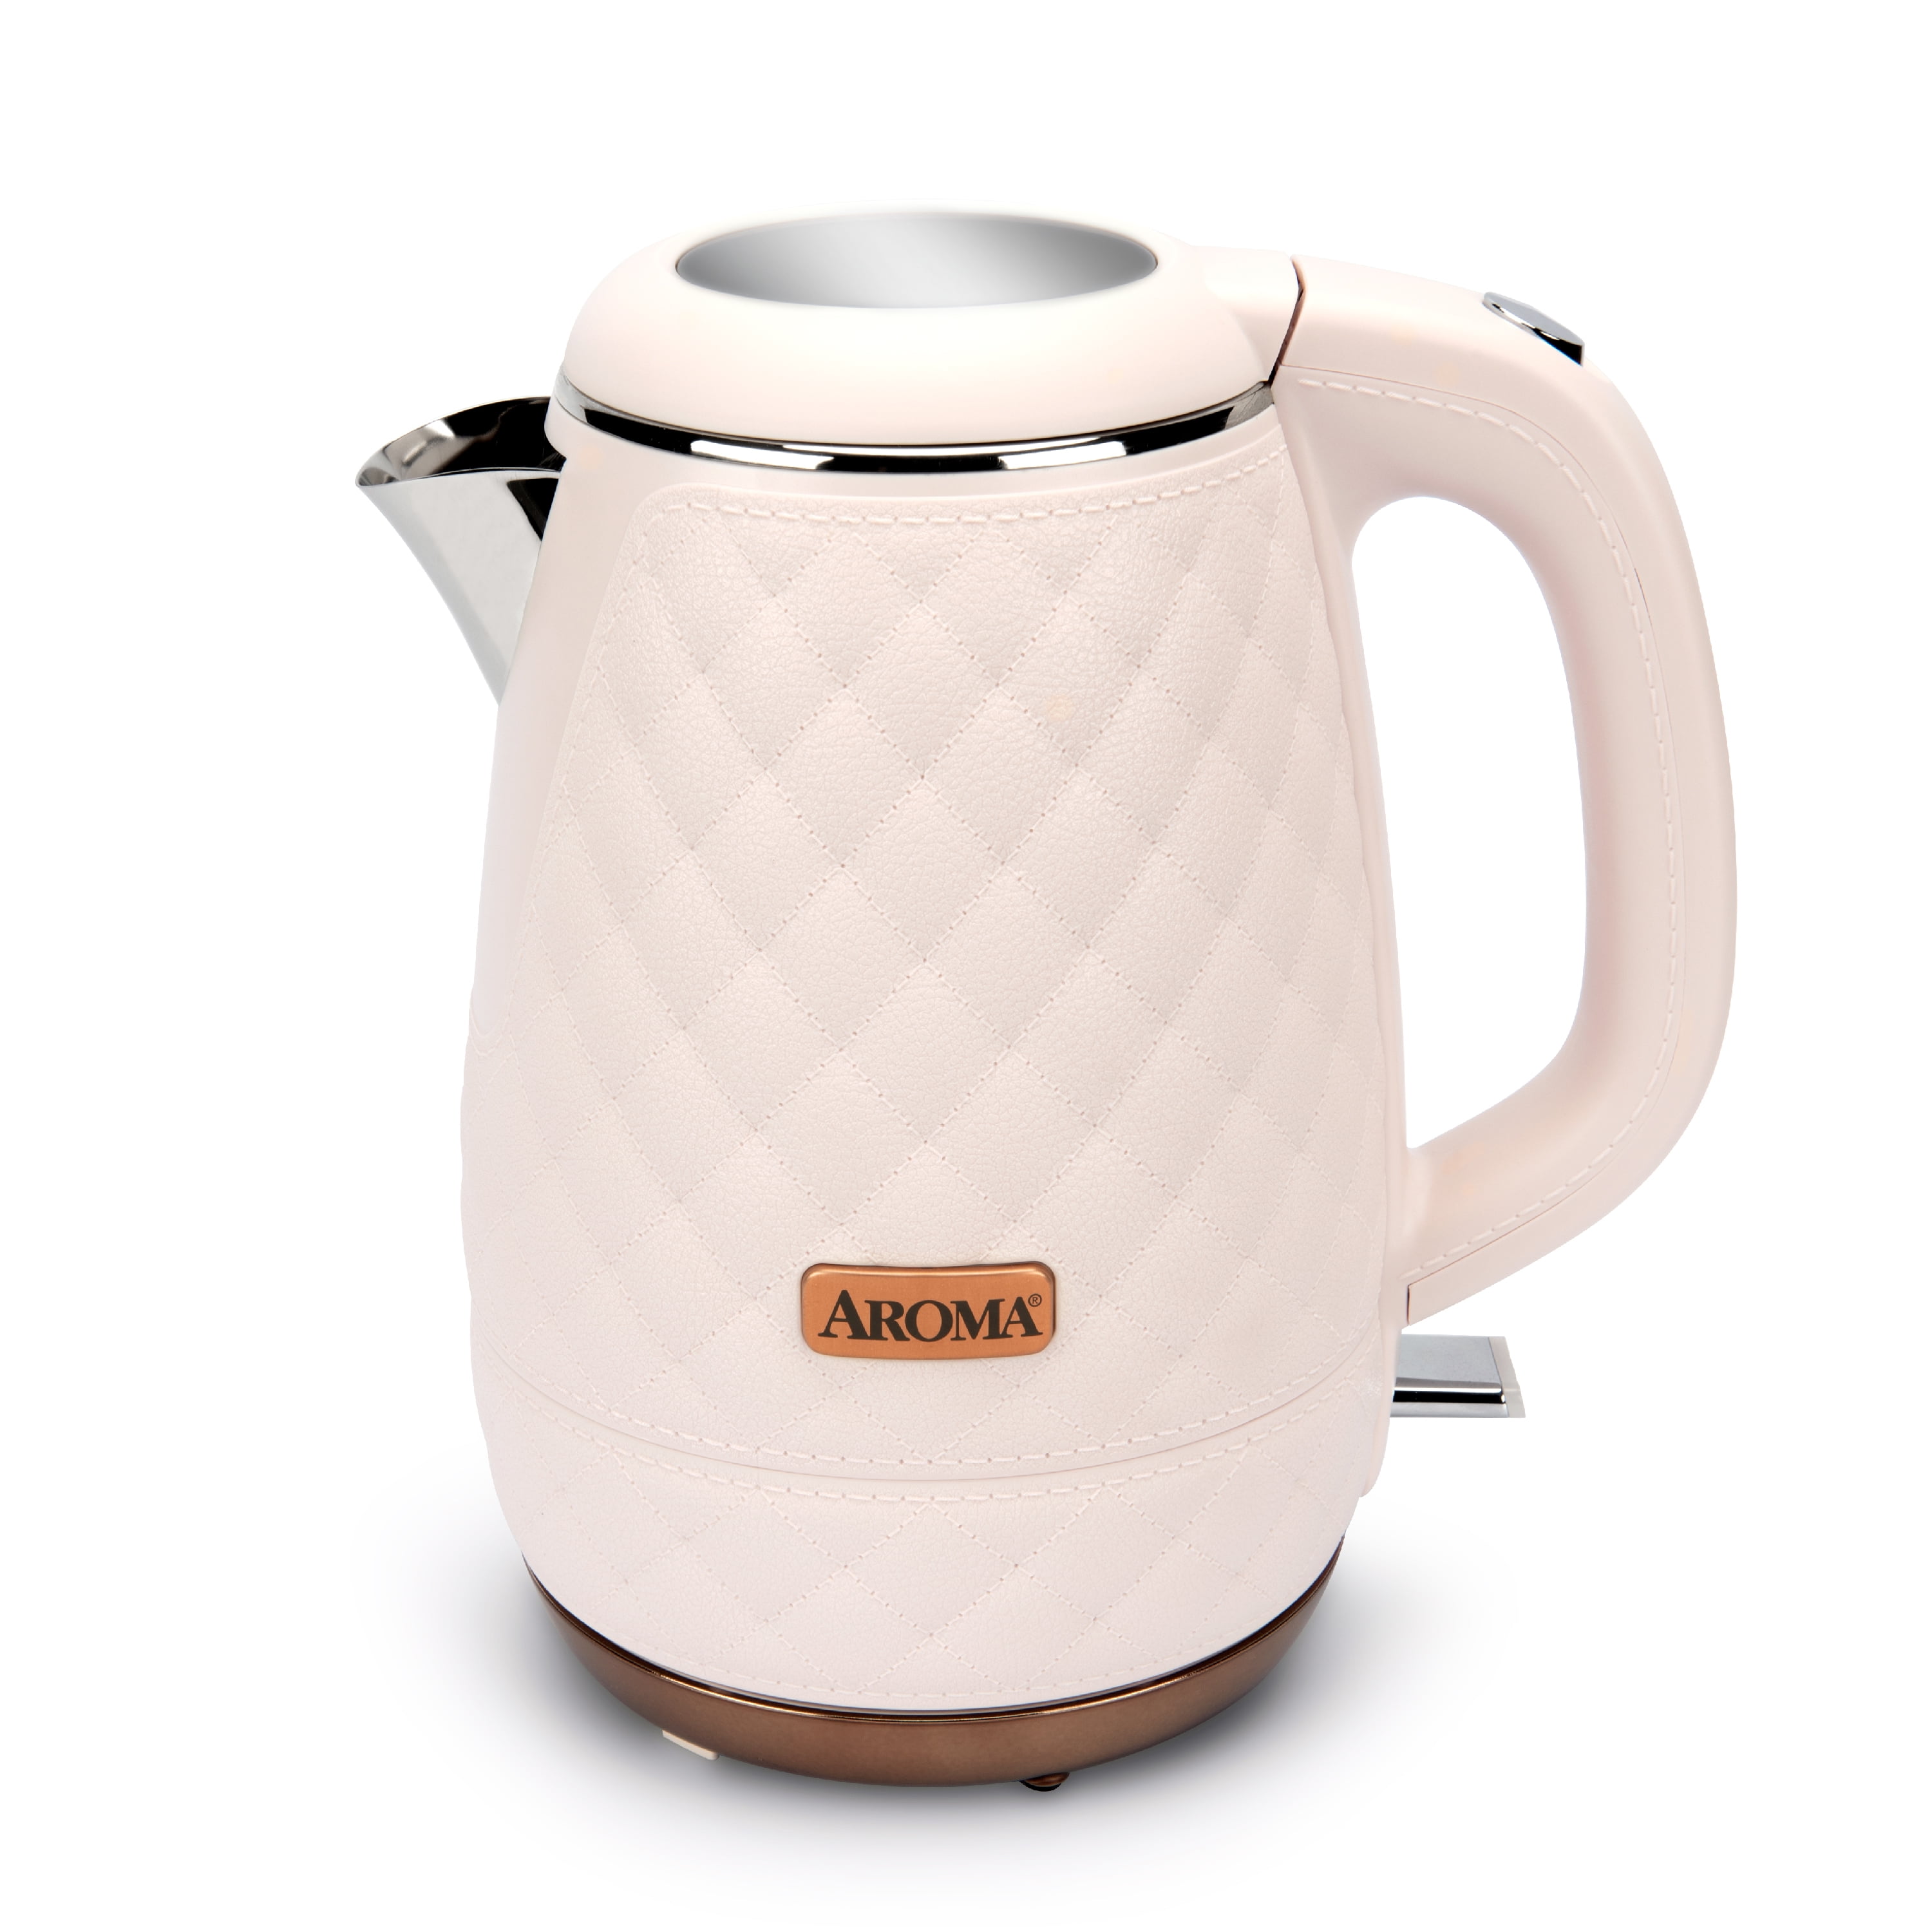 AROMA® Professional 1.5L / 6-Cup Stainless Steel Quilted Electric Kettle, Surgical Grade BPA-Free Stainless Steel, Cool-Touch Handle, Pink (AWK-3000P)